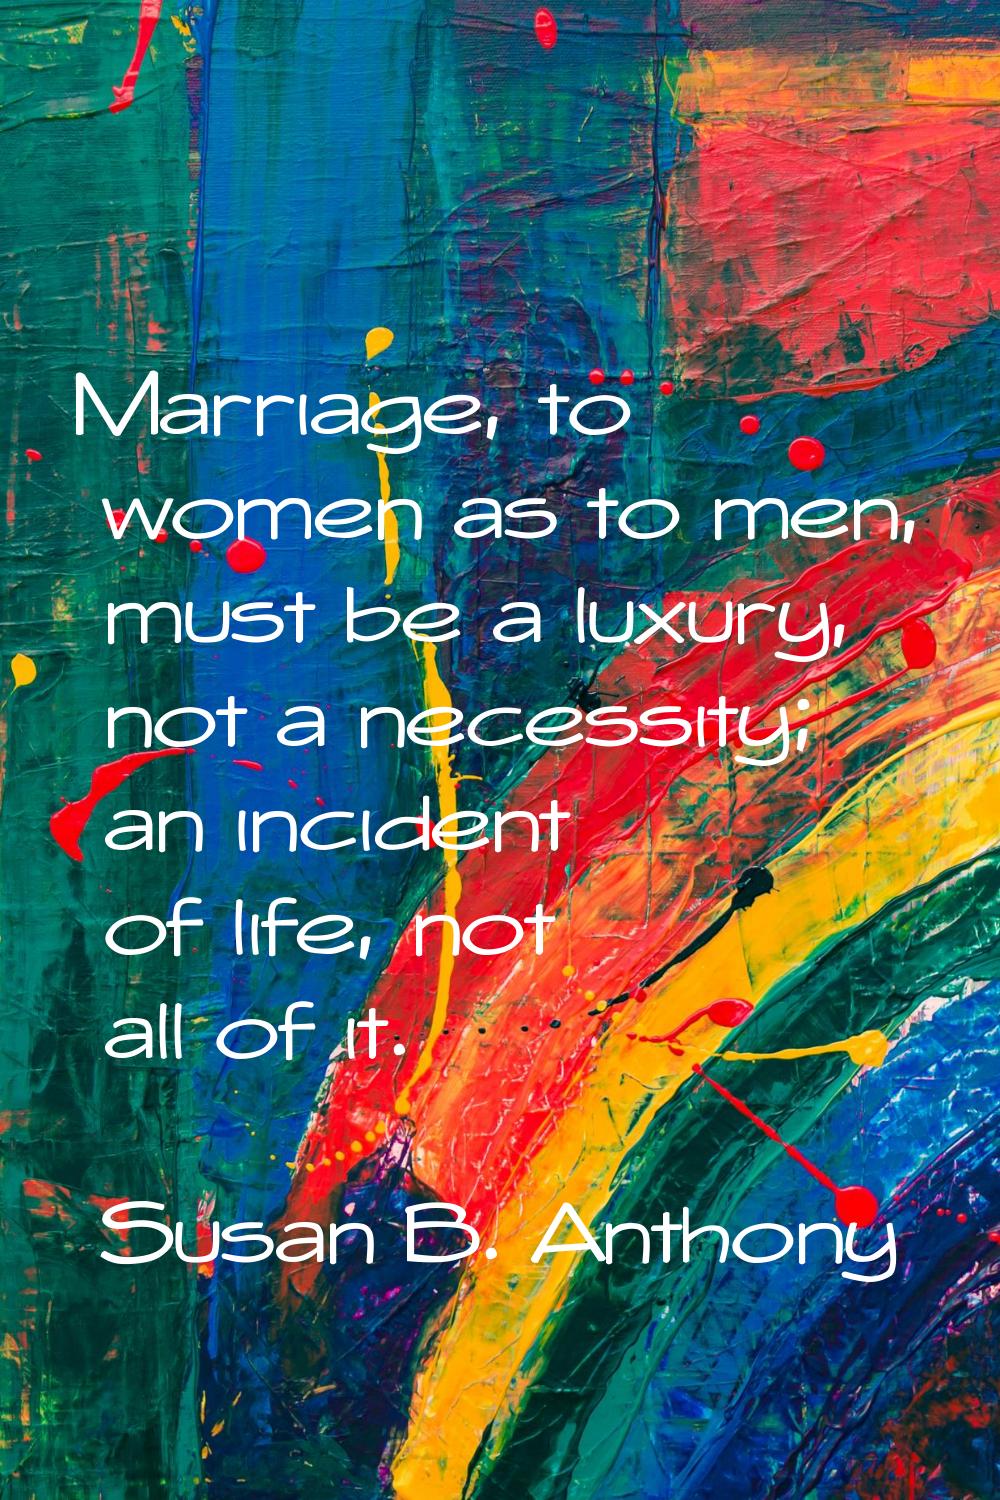 Marriage, to women as to men, must be a luxury, not a necessity; an incident of life, not all of it